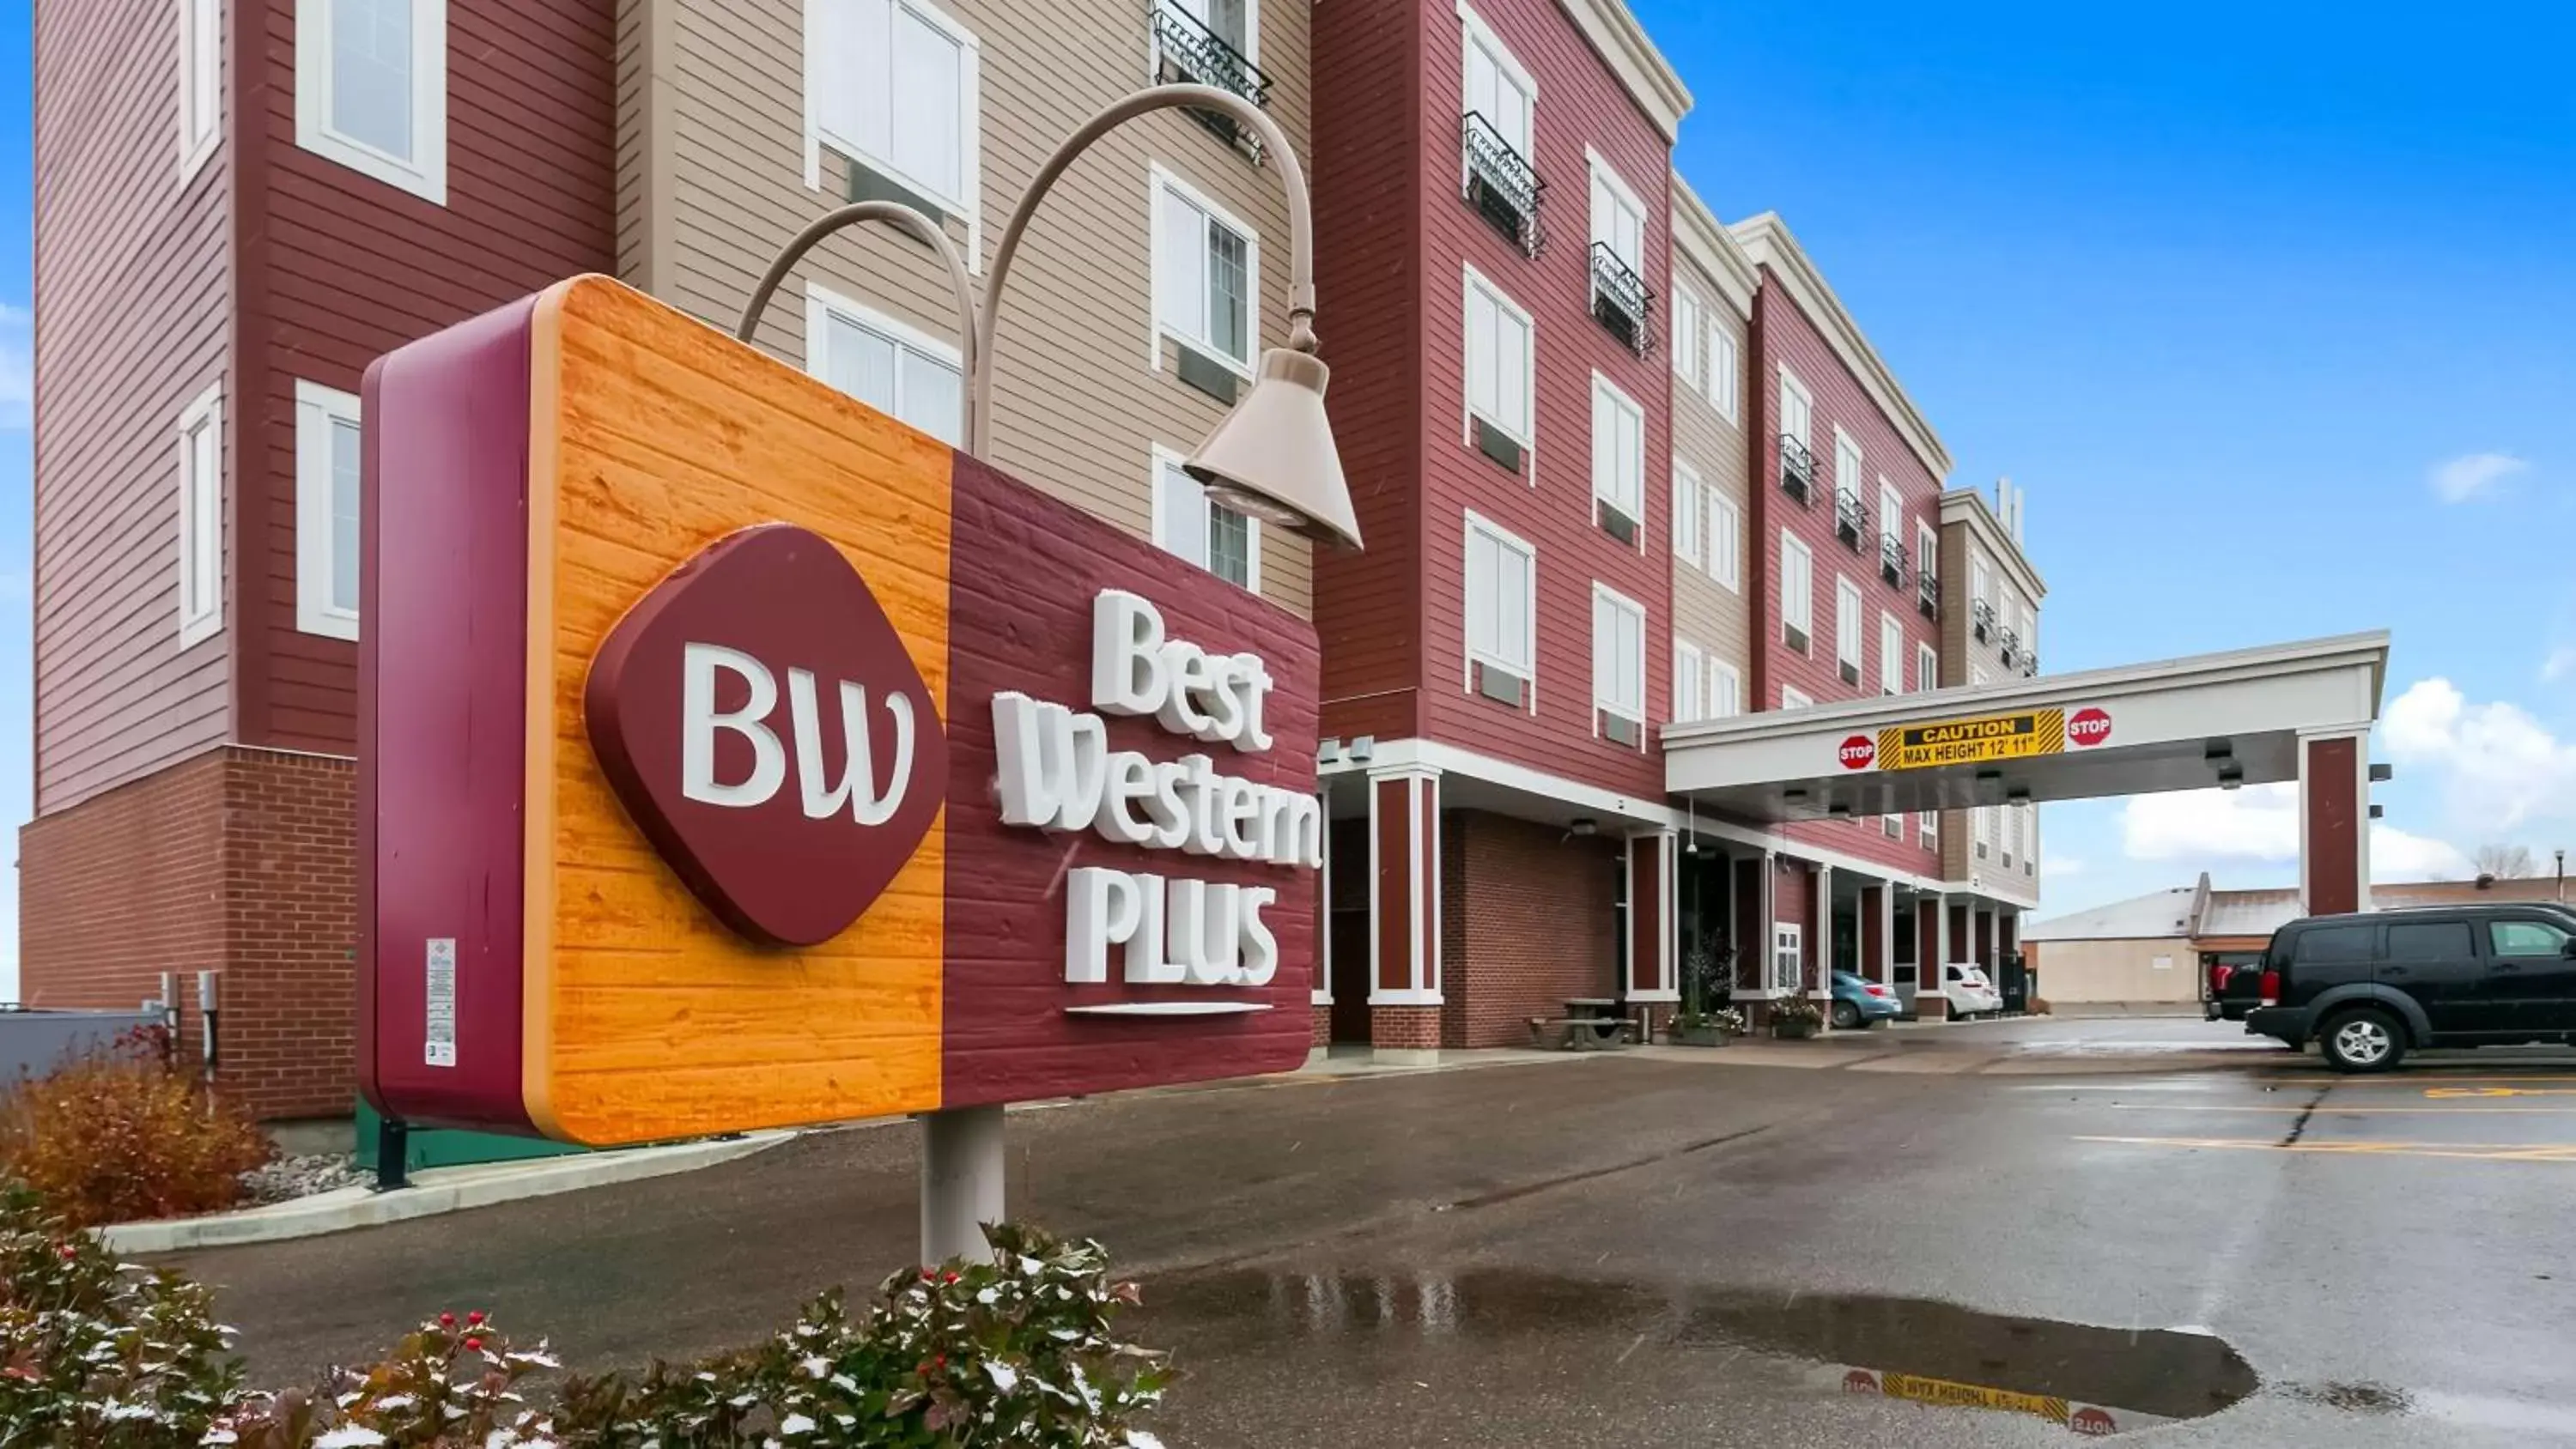 On site, Property Building in Best Western Plus Chateau Inn